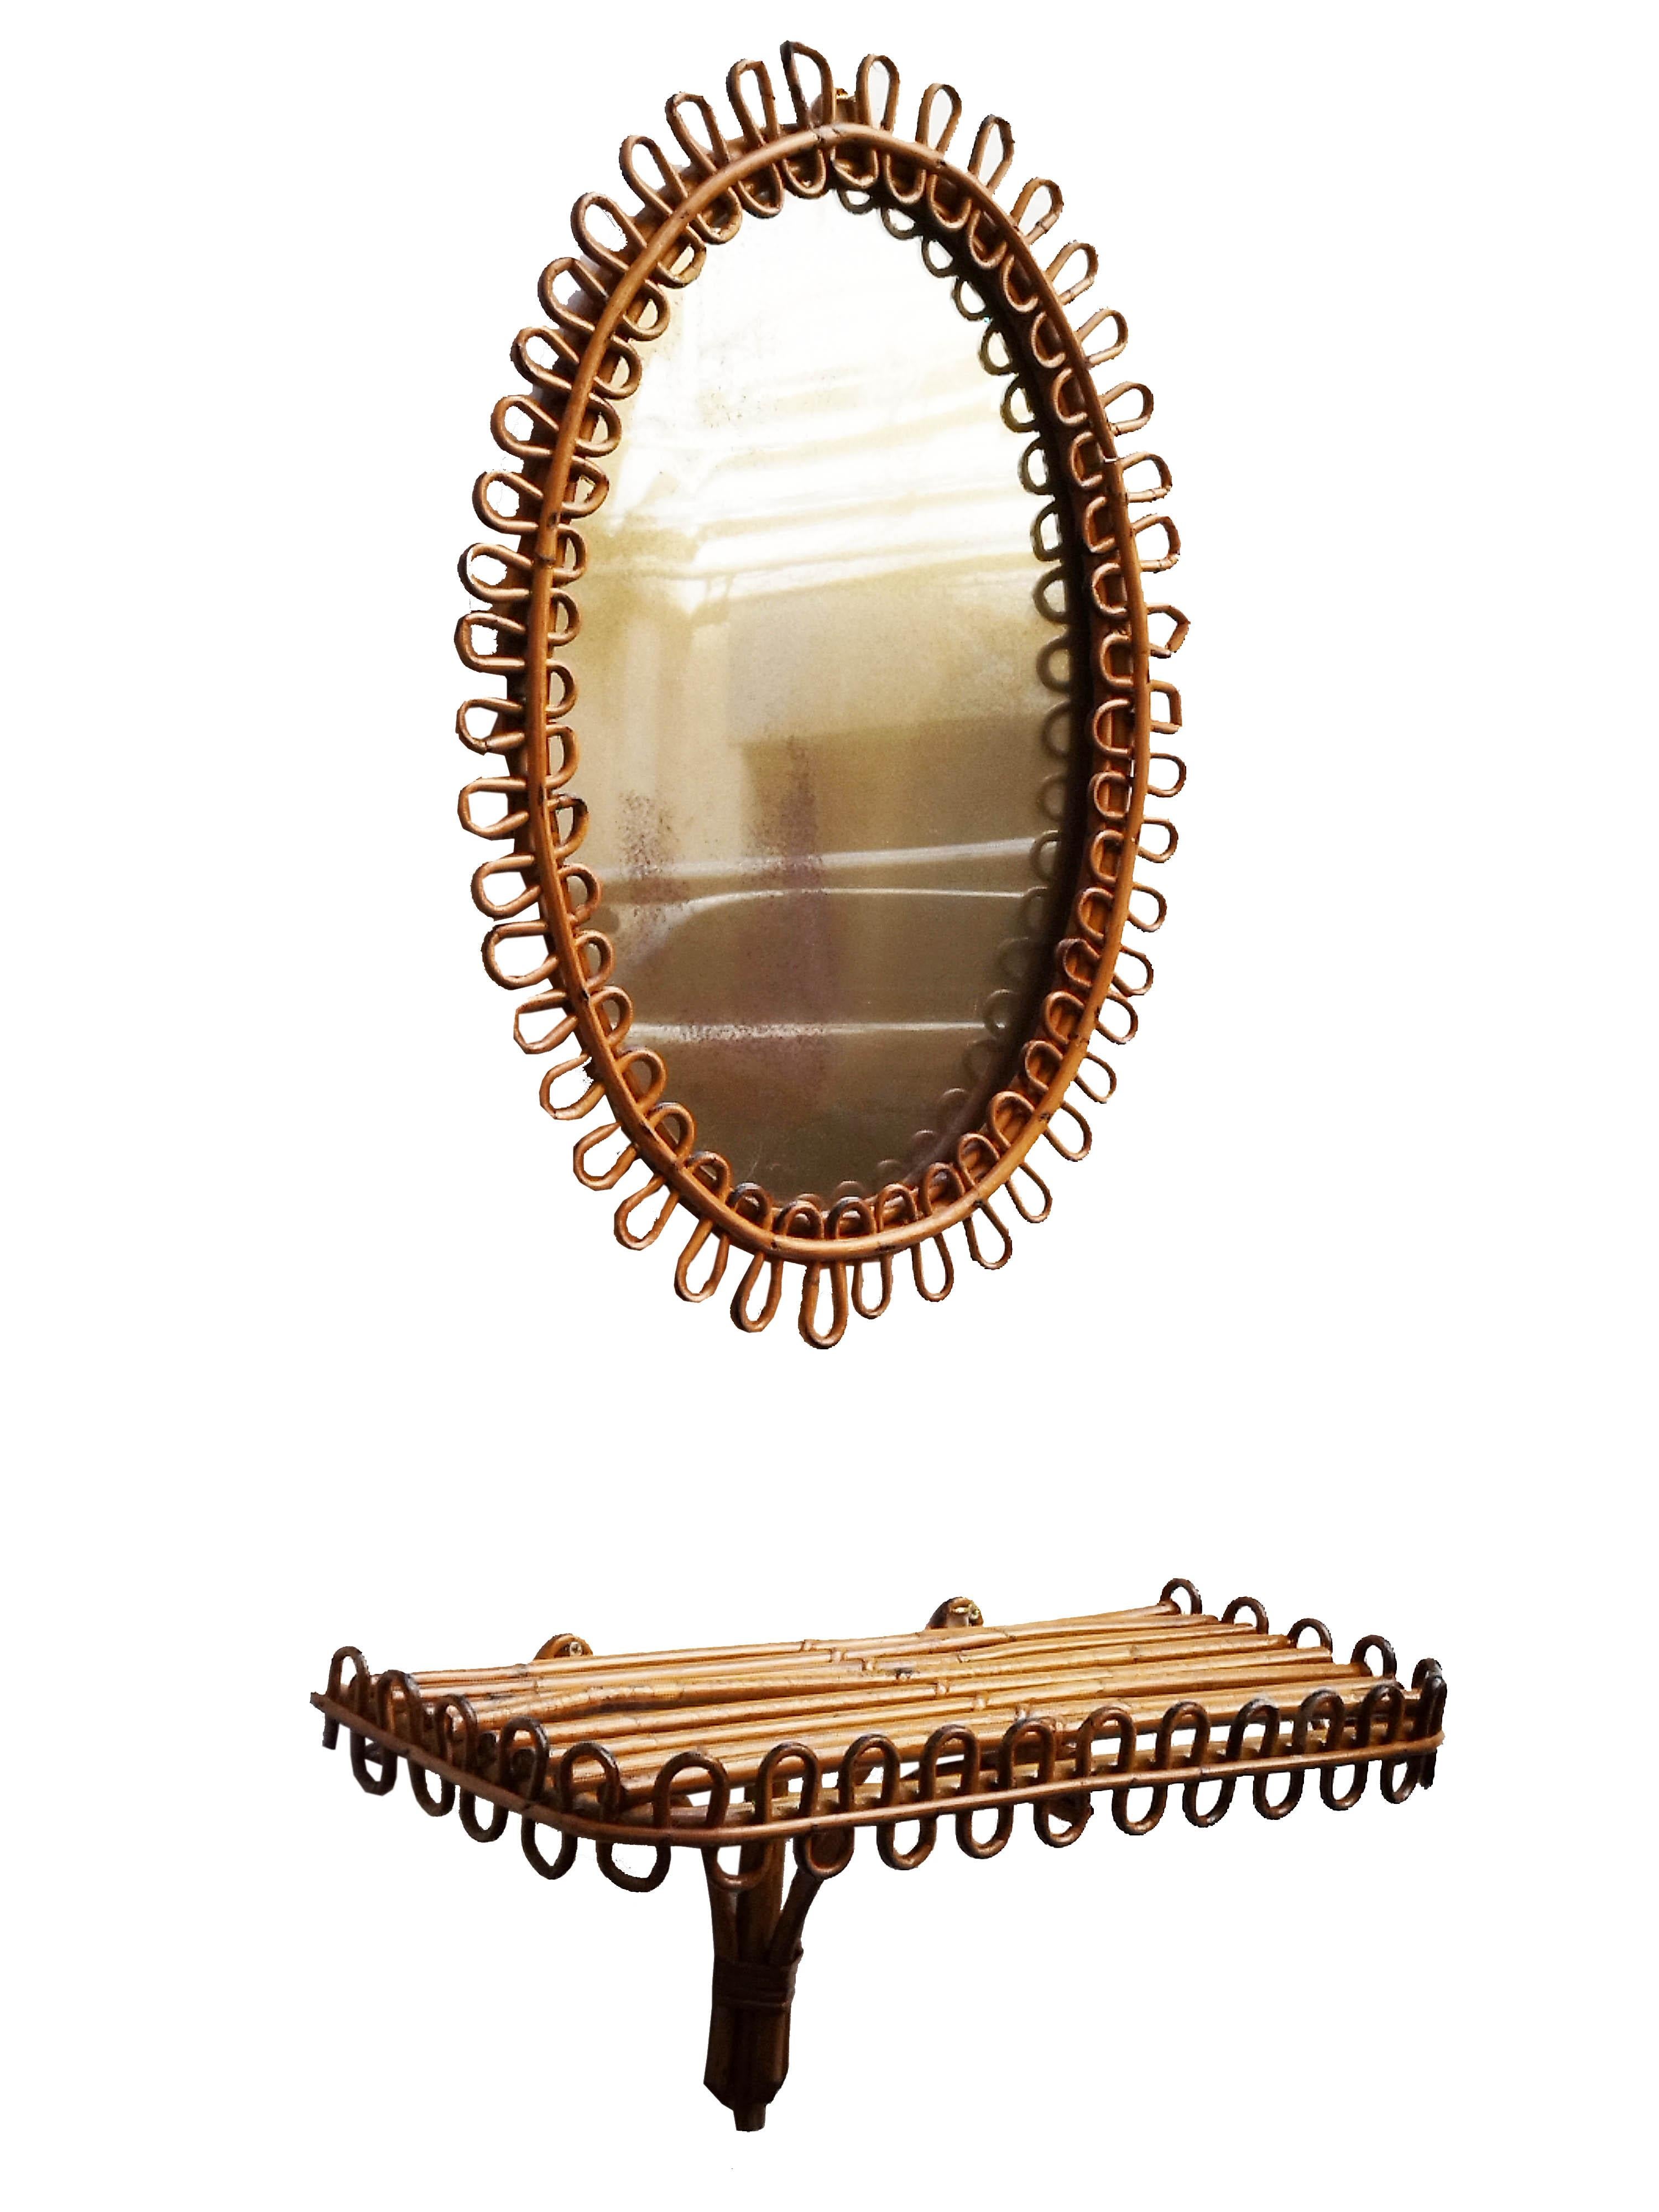 The set consists of an oval mirror with chain and a rectangular shelf.
Its small size and simple, elegant shape make it suitable for an entrance hall or bathroom.
Despite its years, it is in excellent condition with very slight signs of time that